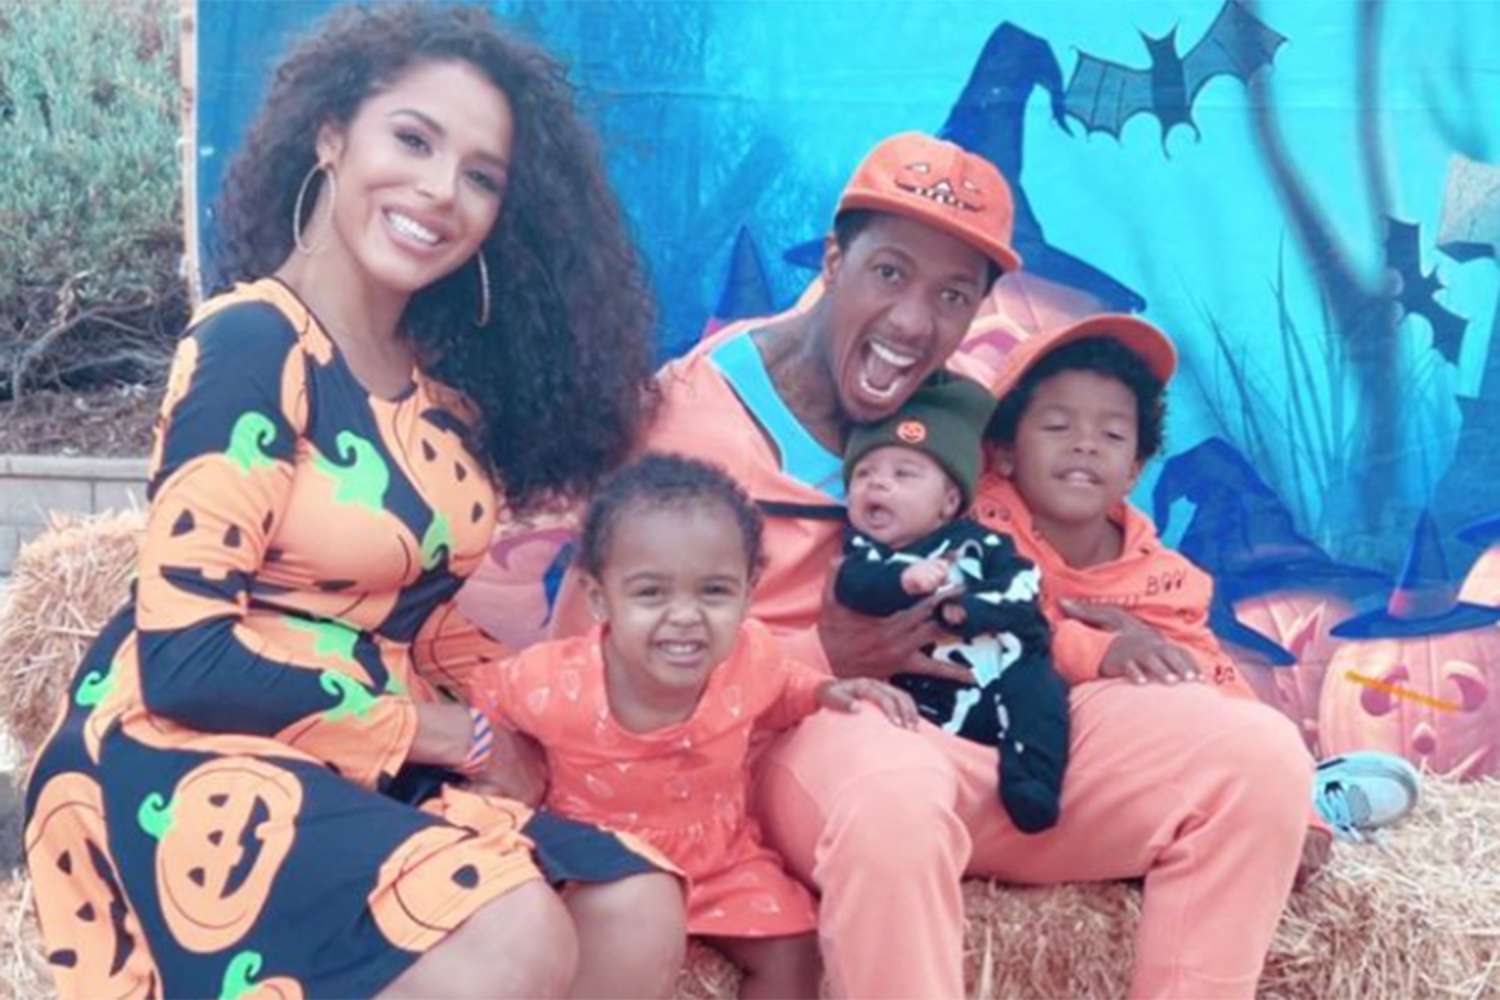 Brittany Bell Celebrates Mother's Day with Her 3 Kids She Shares with Nick Cannon: 'Three Precious Chapters'